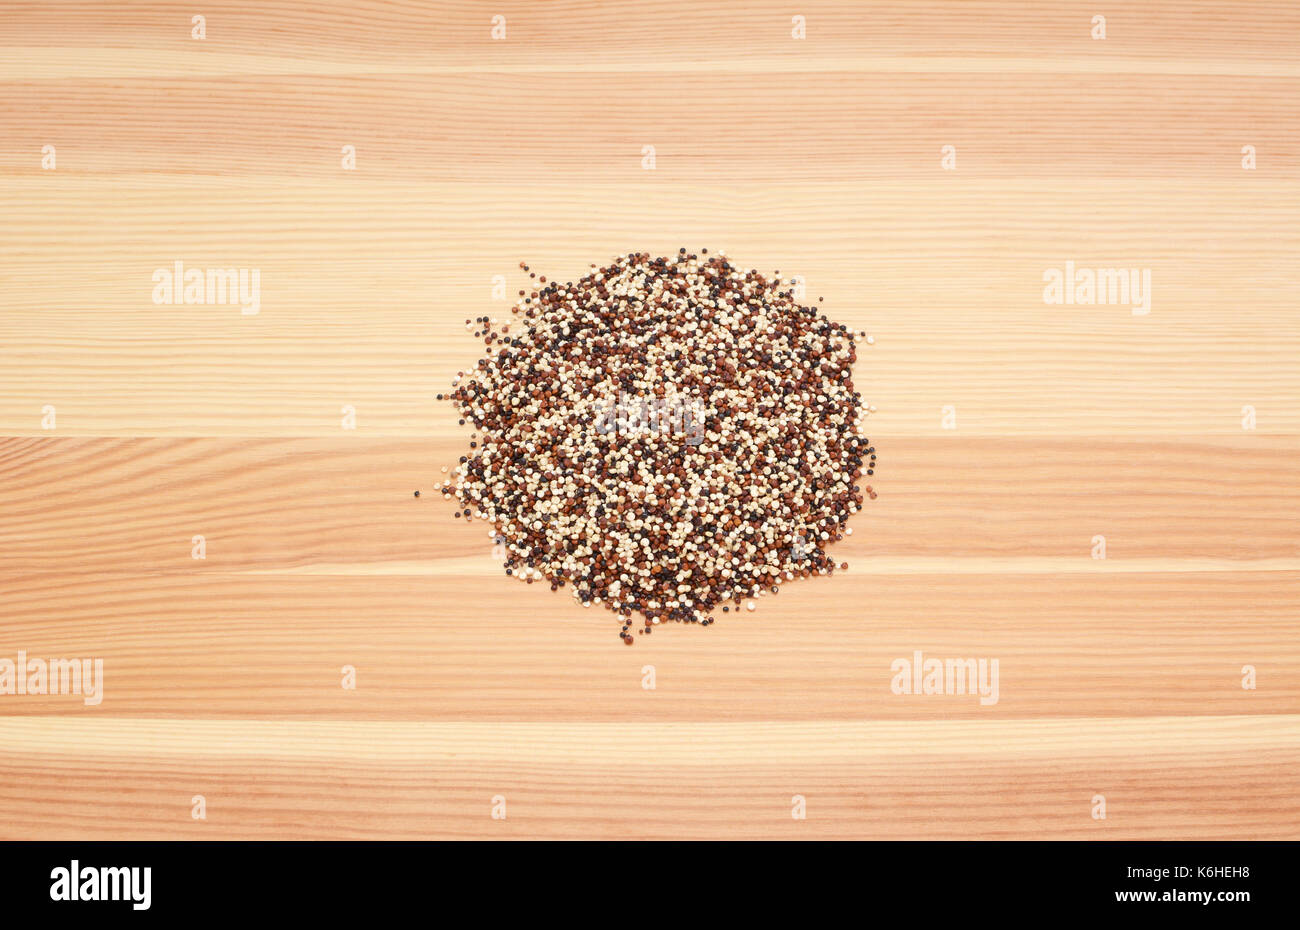 Mixed red, white and black quinoa on a wooden background, pine wood grain Stock Photo